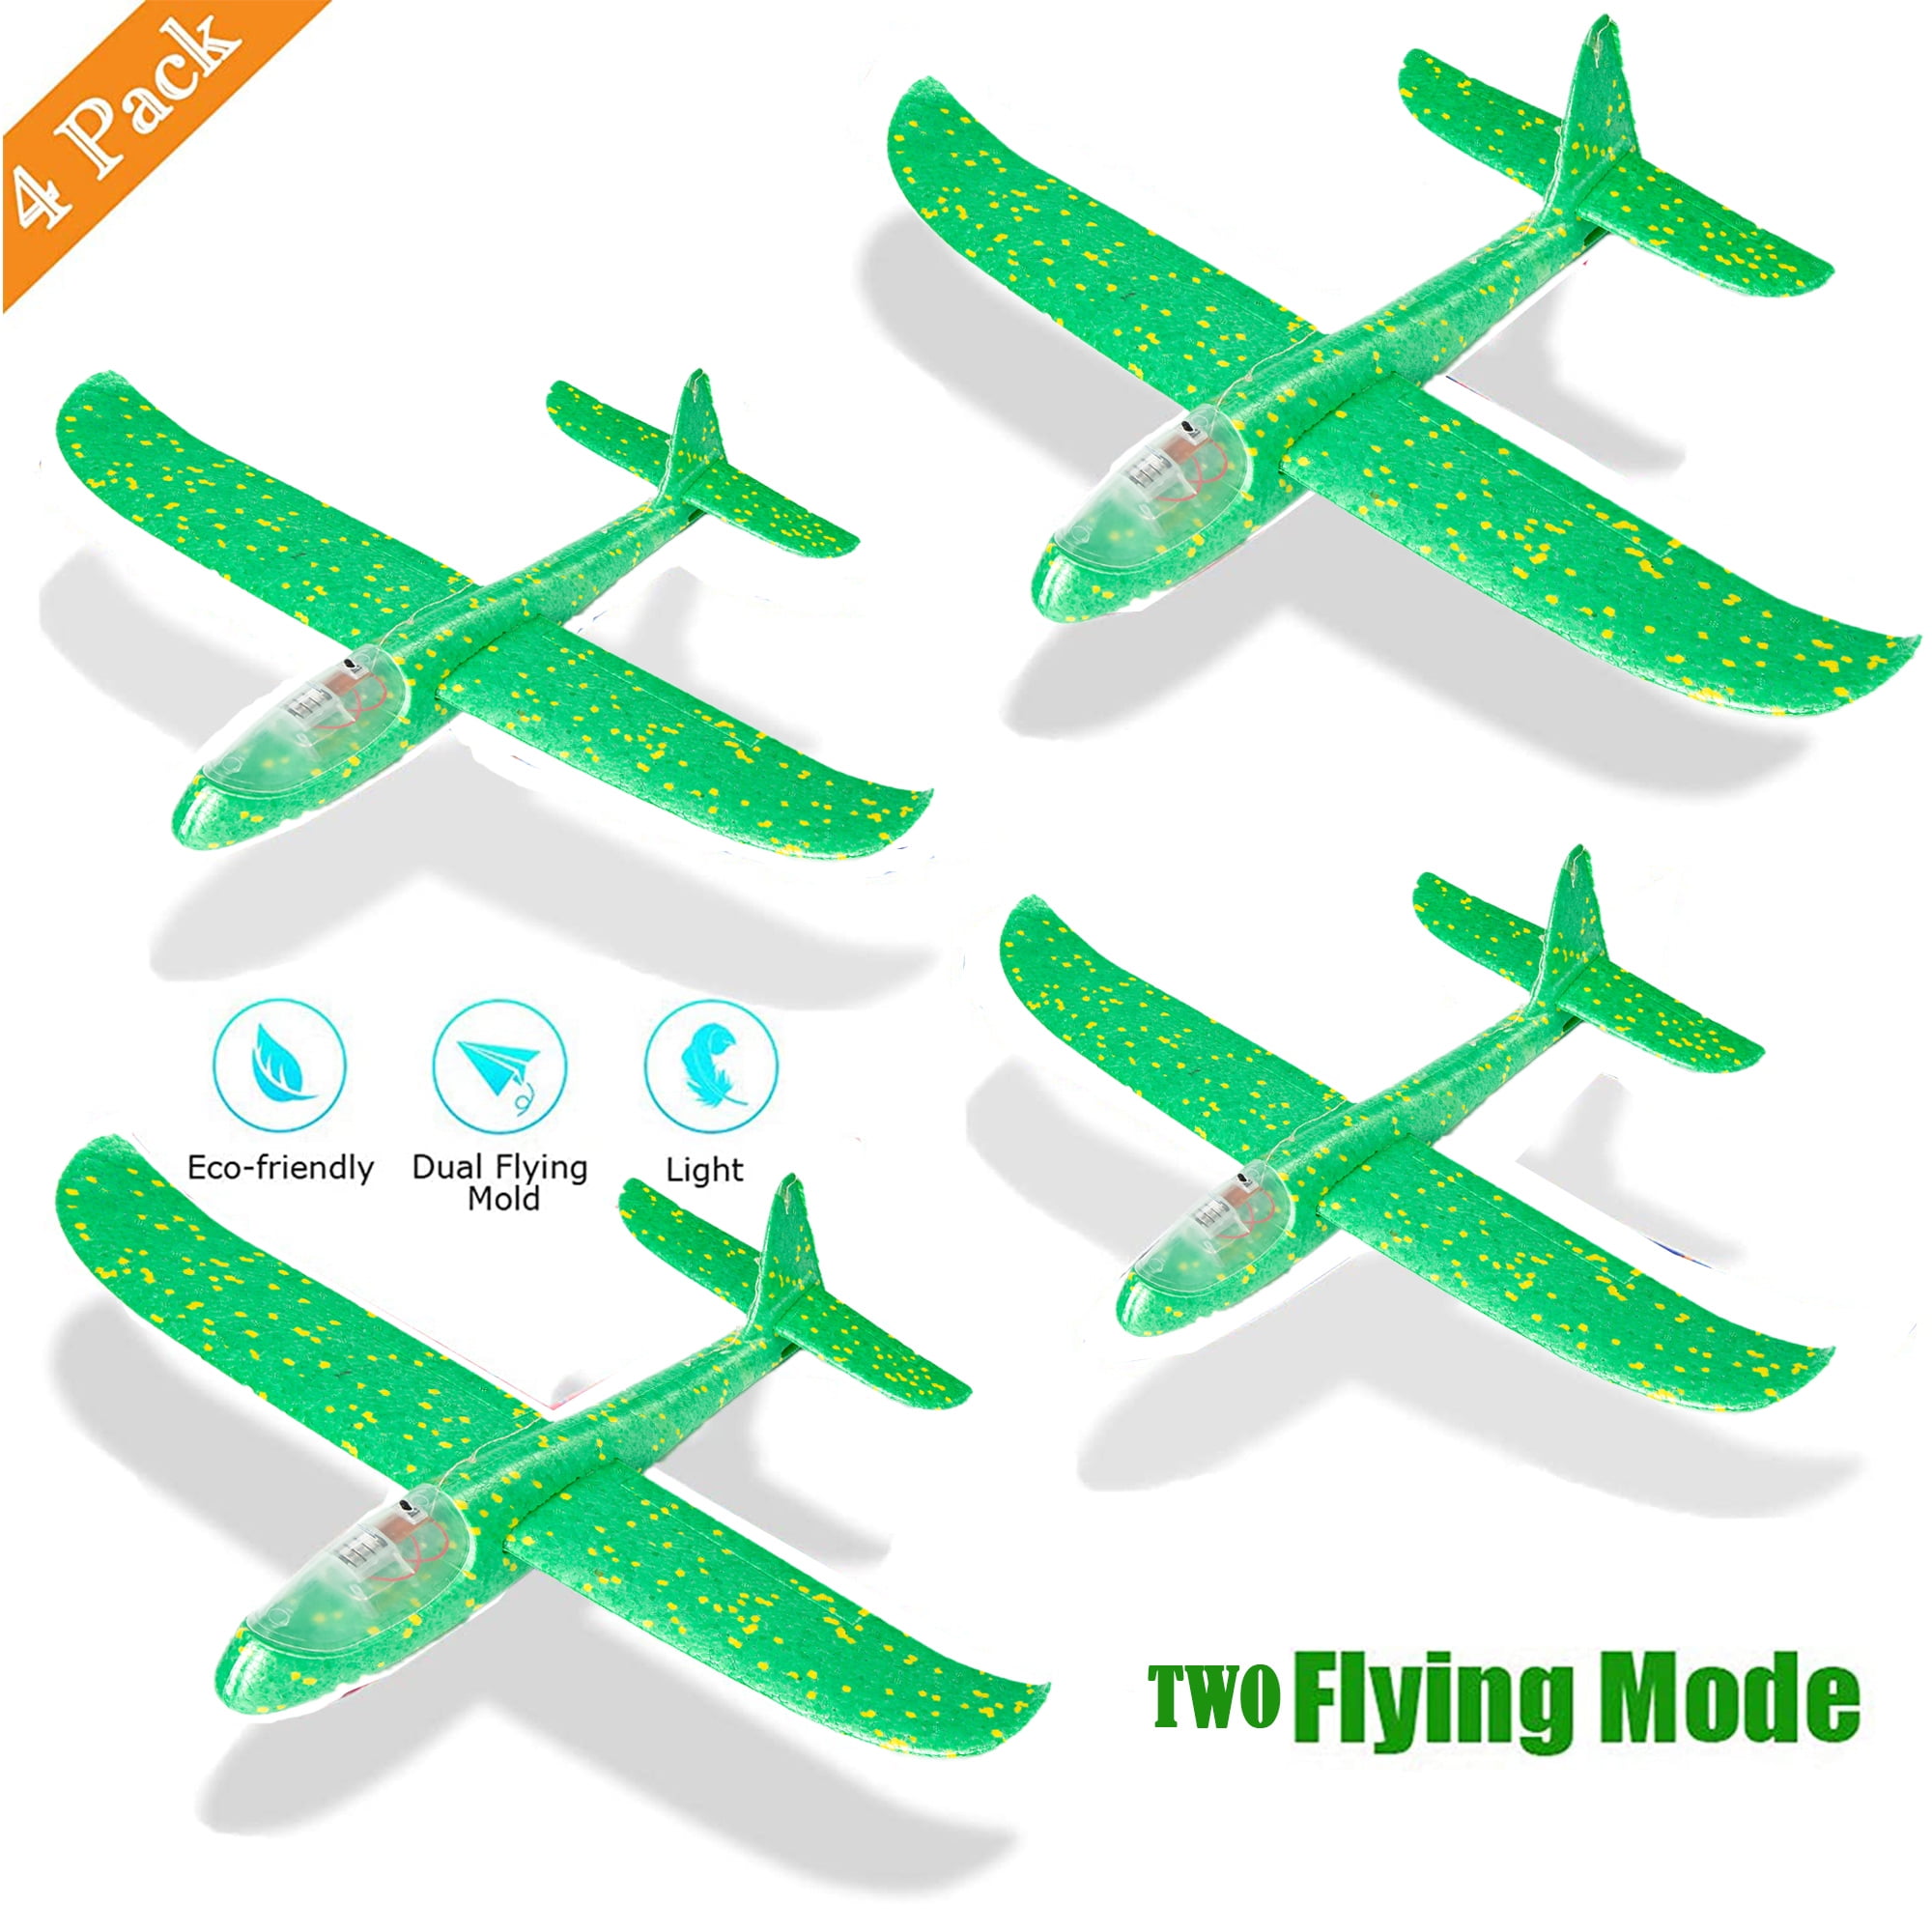 Soft Foam Airplane Bubble Glider Plane Manual Throwing Inertial Plane Model for Outdoor Sports Toy ＆ Kids Toys Gift Foam Aircraft Model 